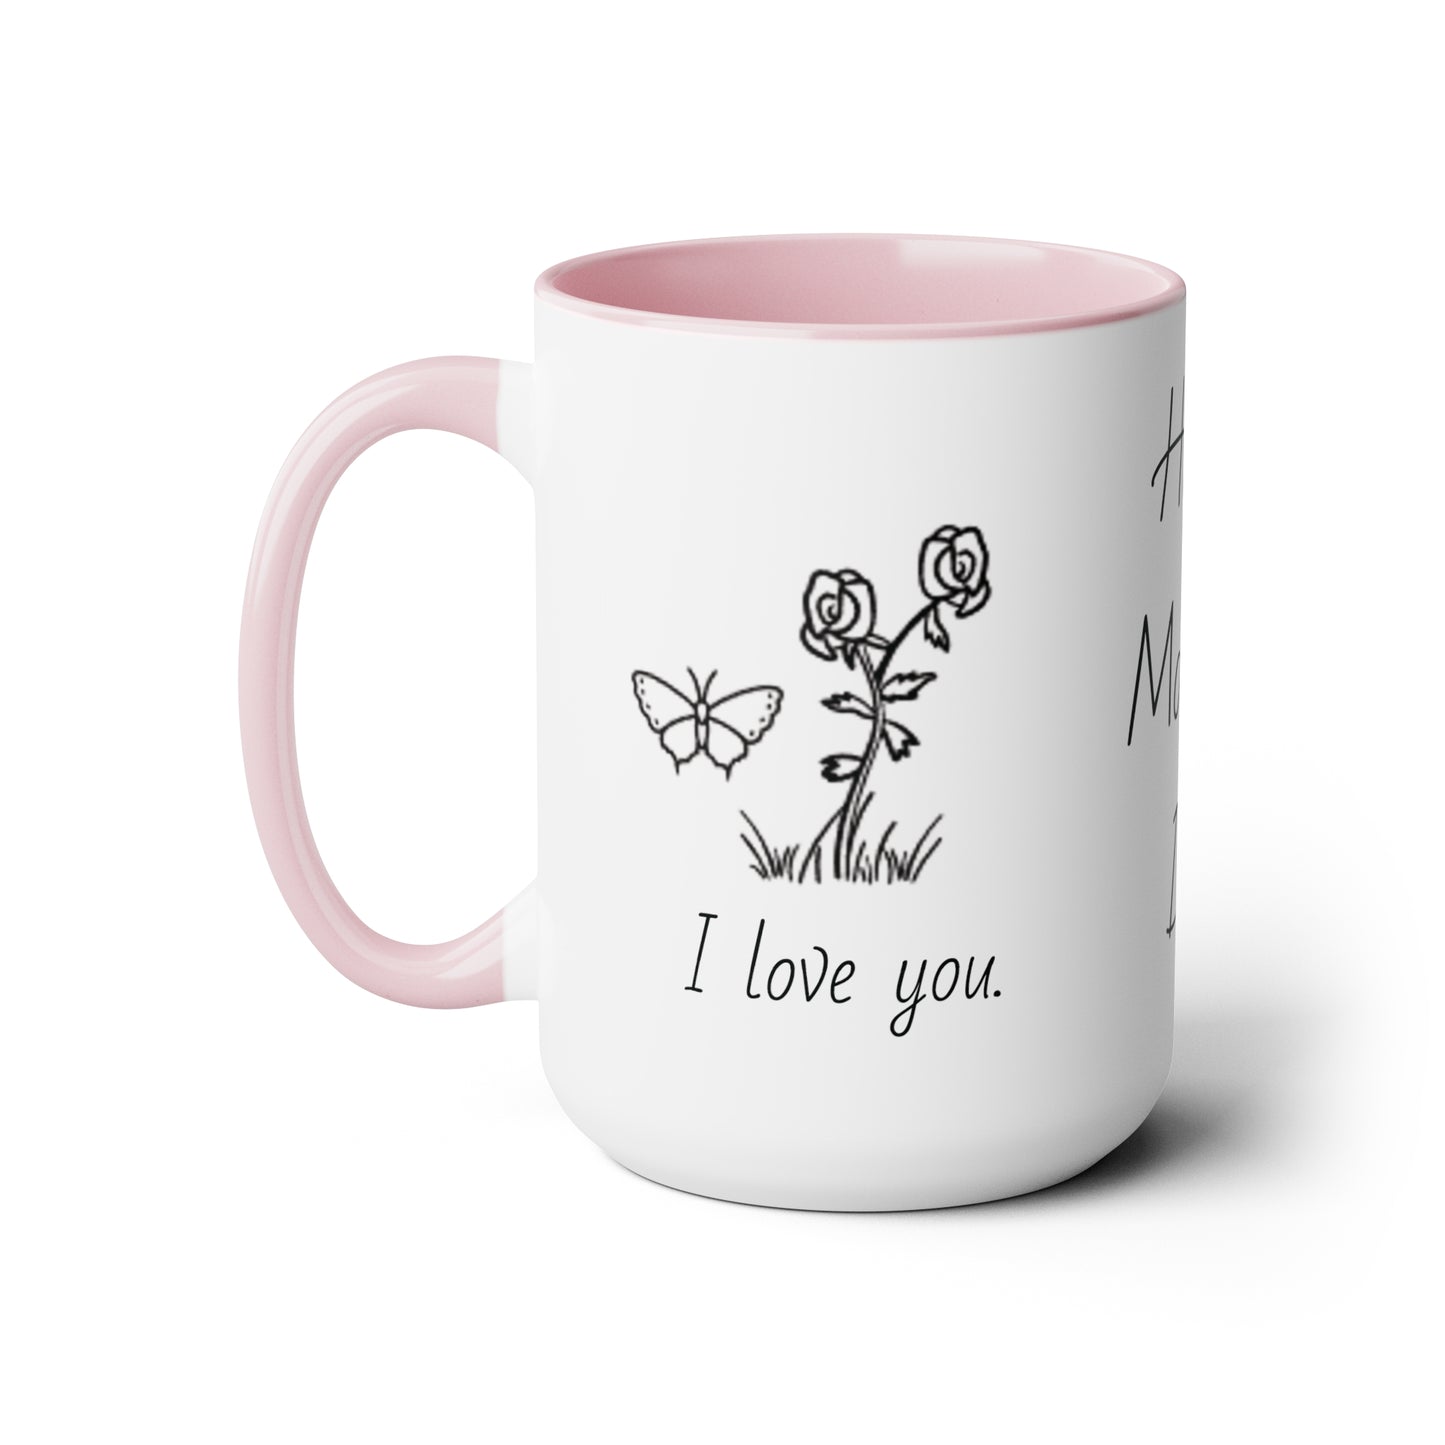 Mother's Day Two-Tone Coffee Mugs, 15oz